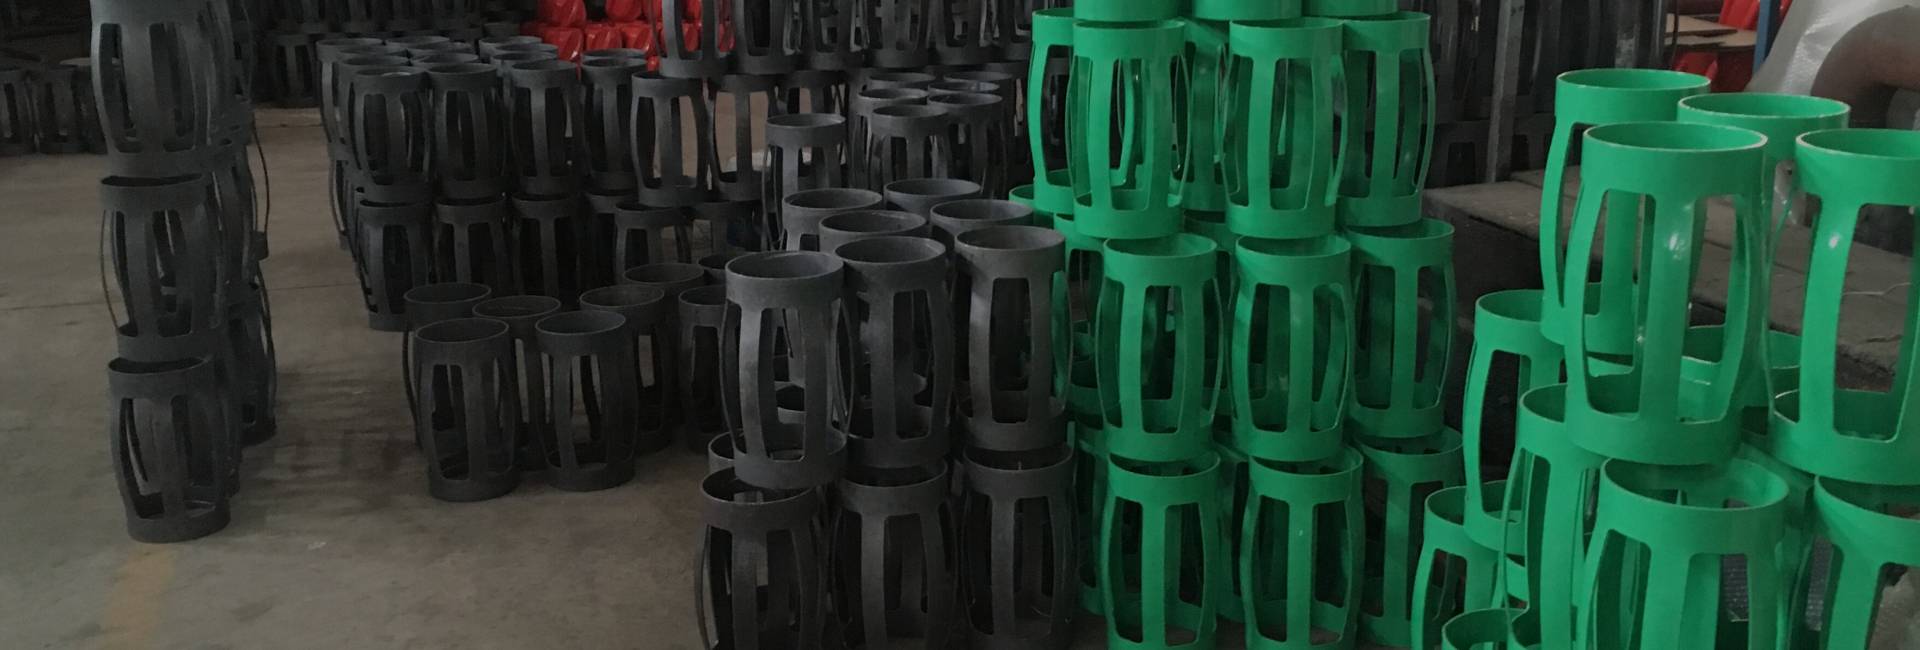 Several coated and uncoated cementing casing centralizers in the warehouse.